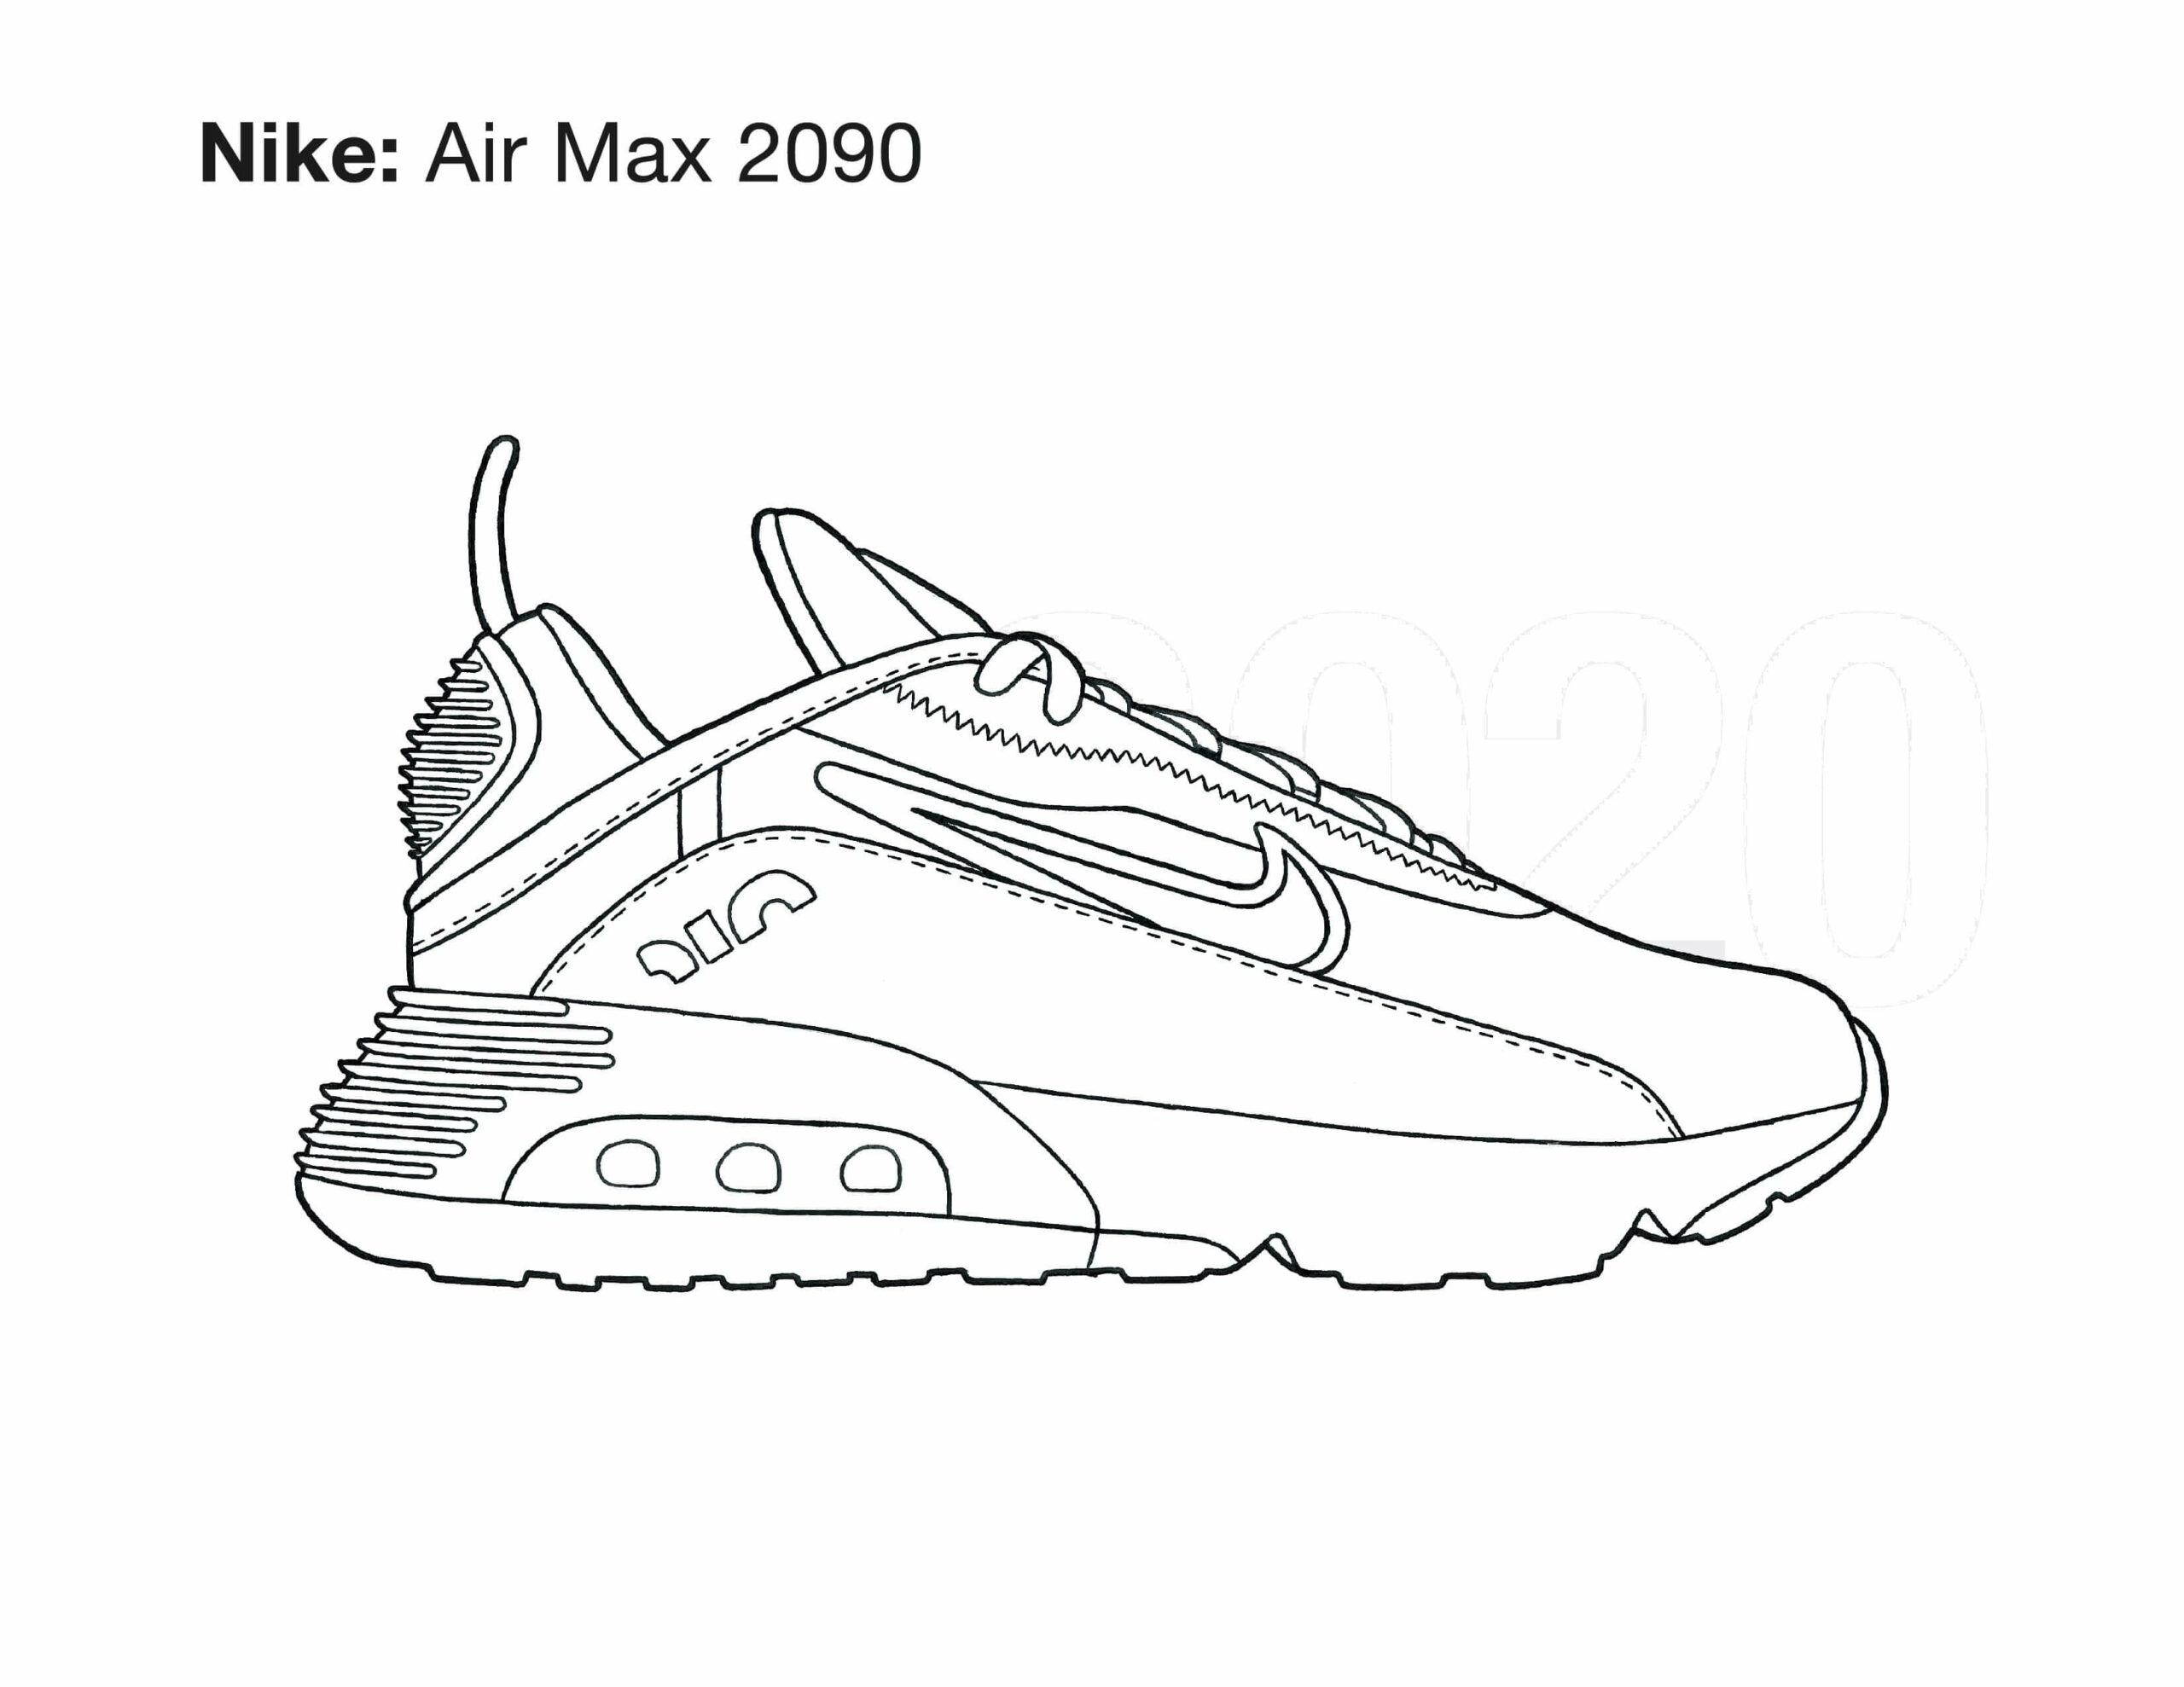 Nike Air Max 2090 coloring page - Download, Print or Color Online for Free